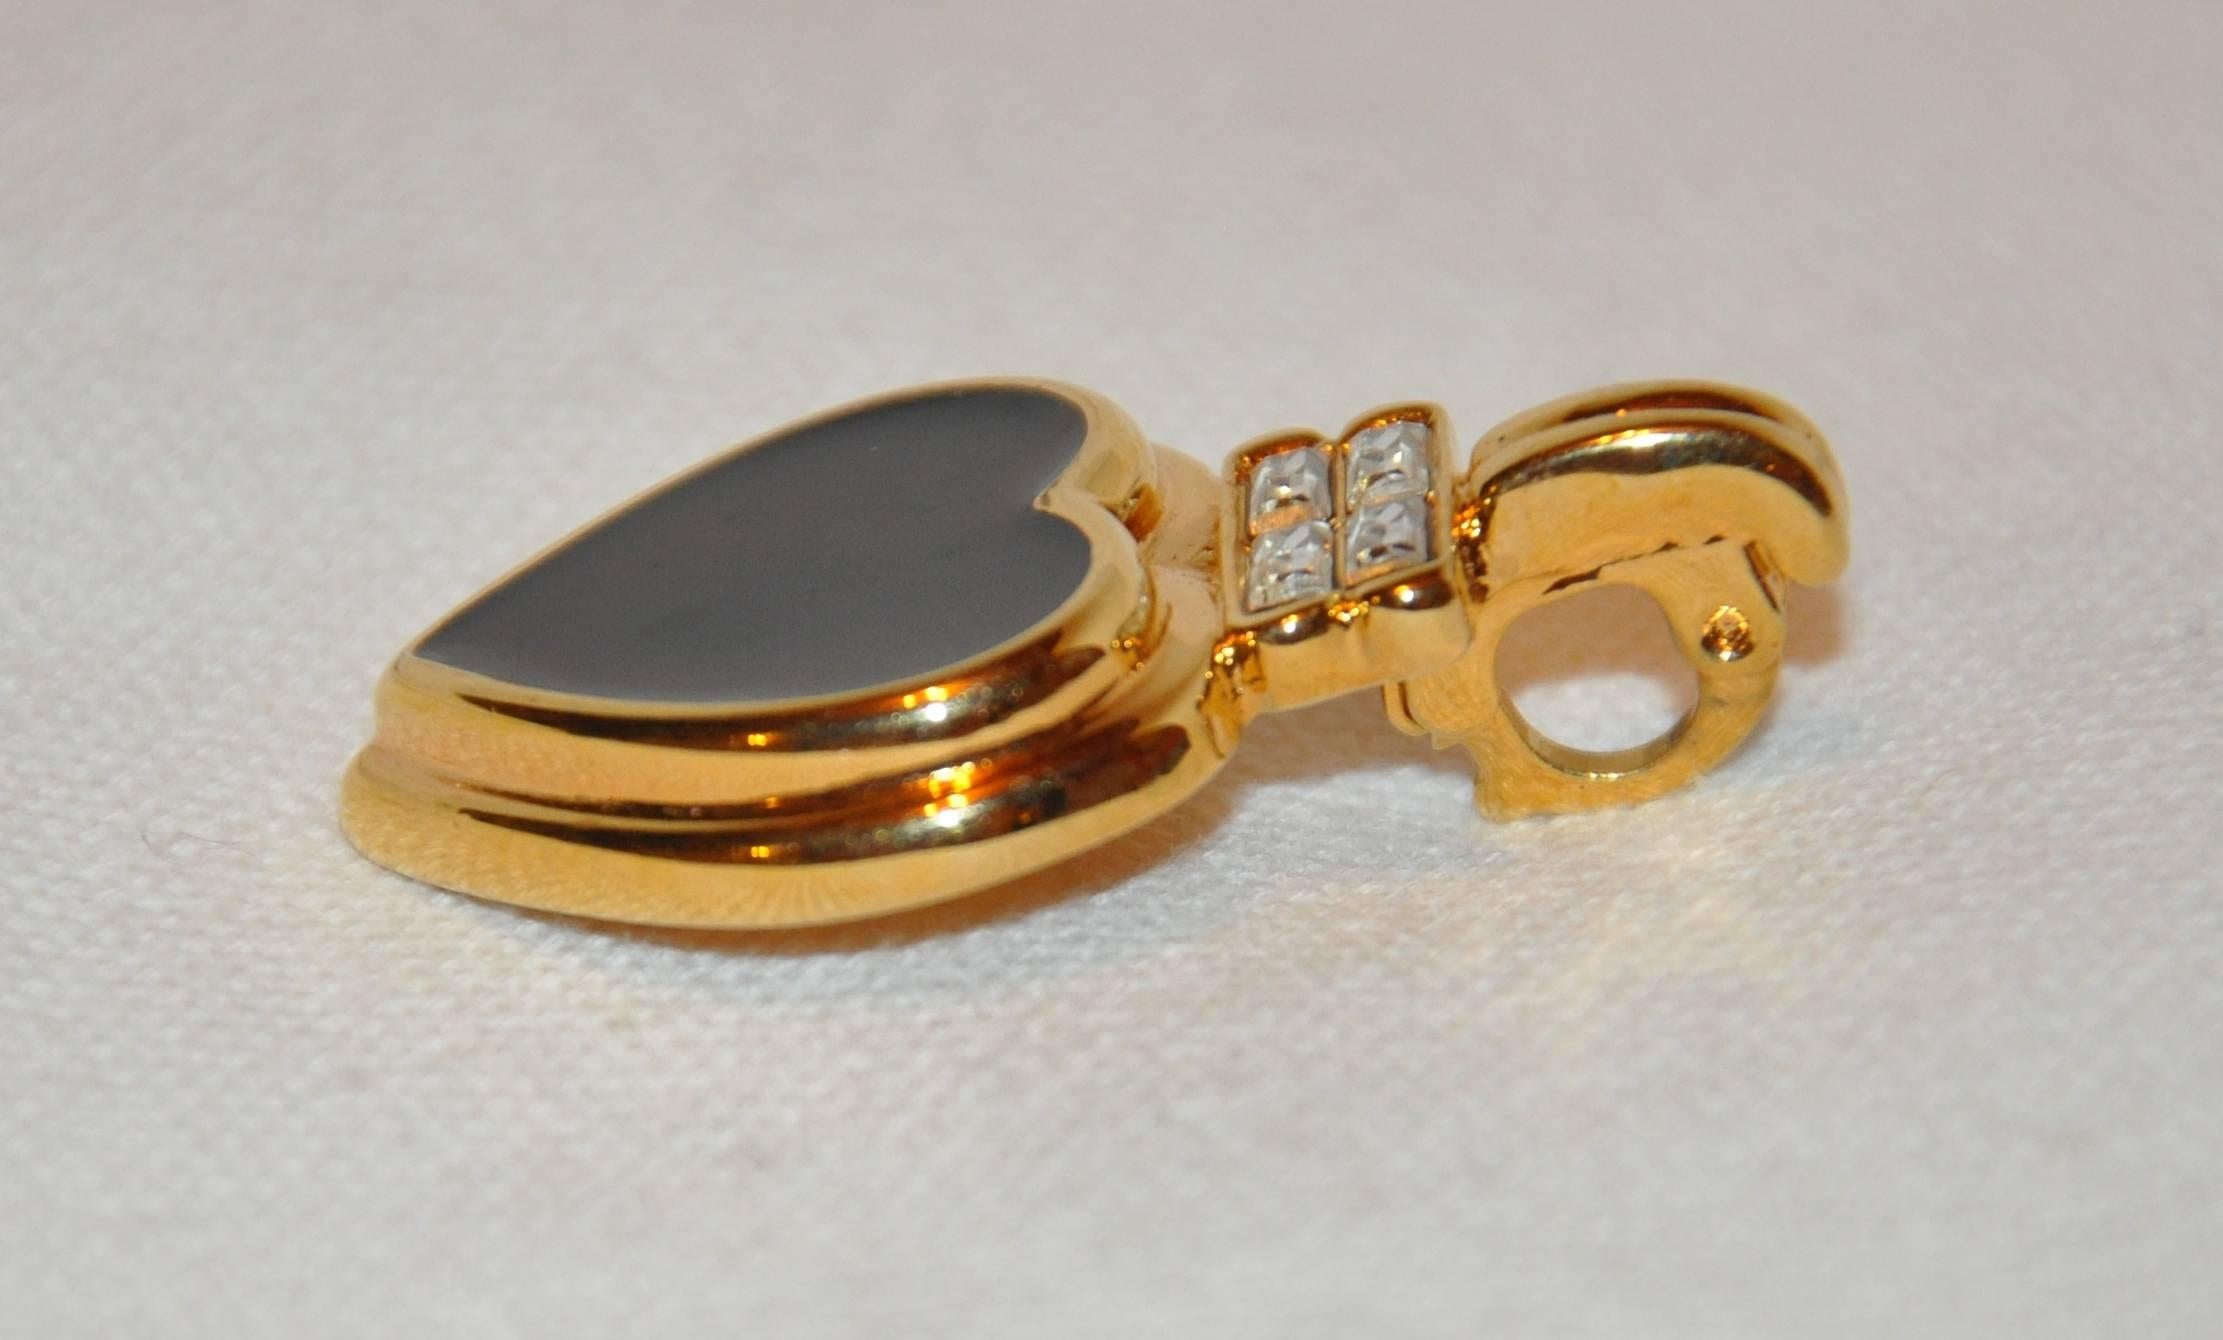        Kenneth Jay Lane gilded gold vermeil hardware accented with black enamel pendant is detailed with a clip-on clasp to use as a pendant, or, if desired, to clip on to a charm bracelet, and measures 1 5/8" x 1". Made in the United